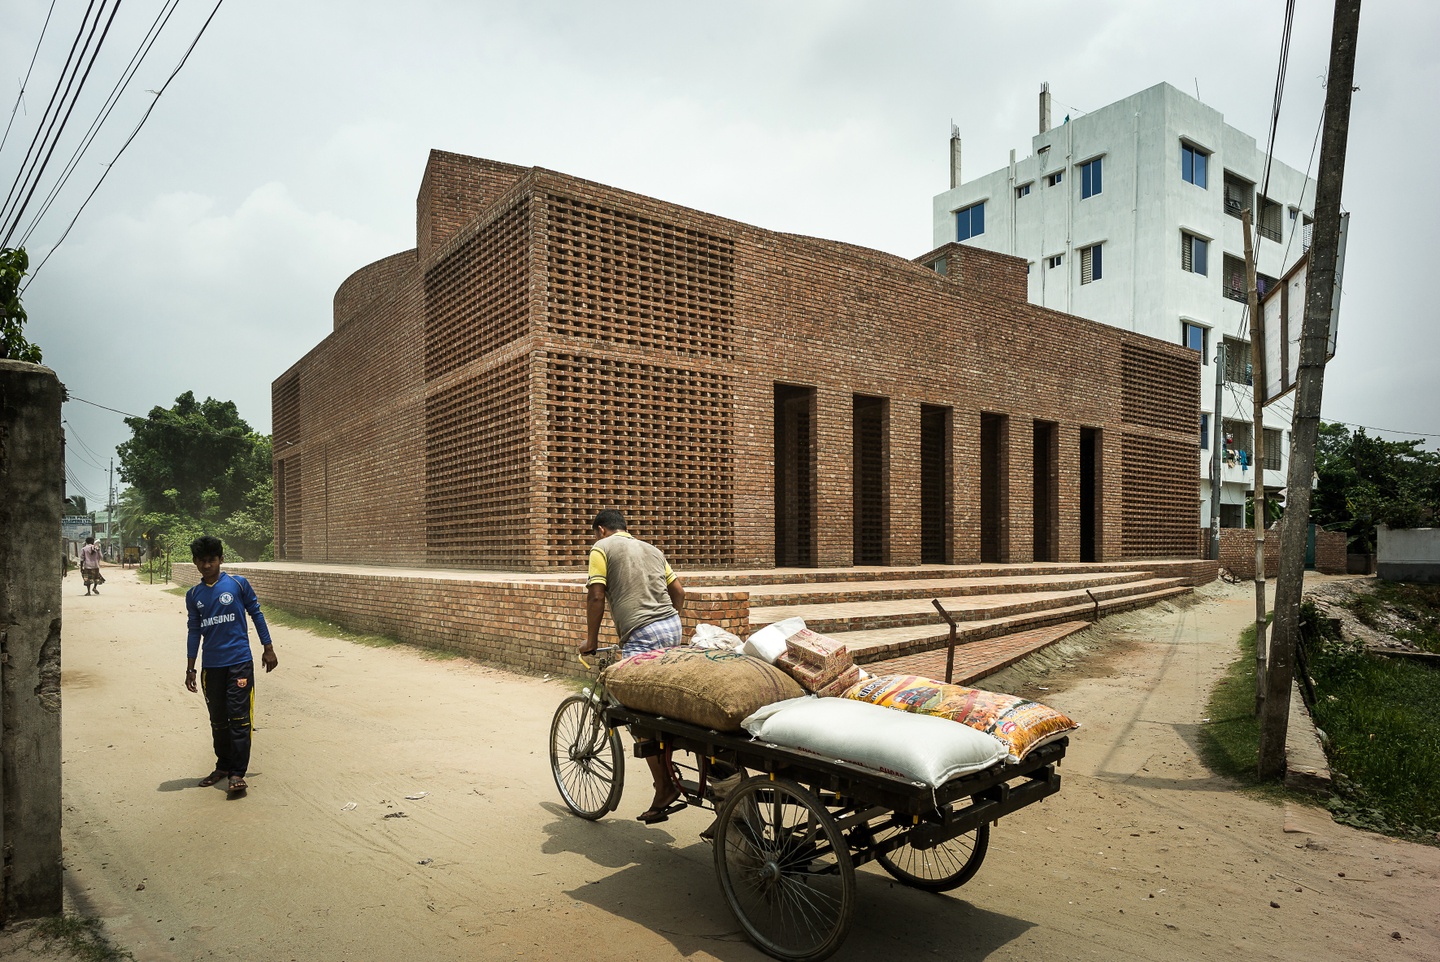 Photo of a red-brick, flat-roofed mosque with several doorway entries; a person on a bike with a cart is in the foreground.